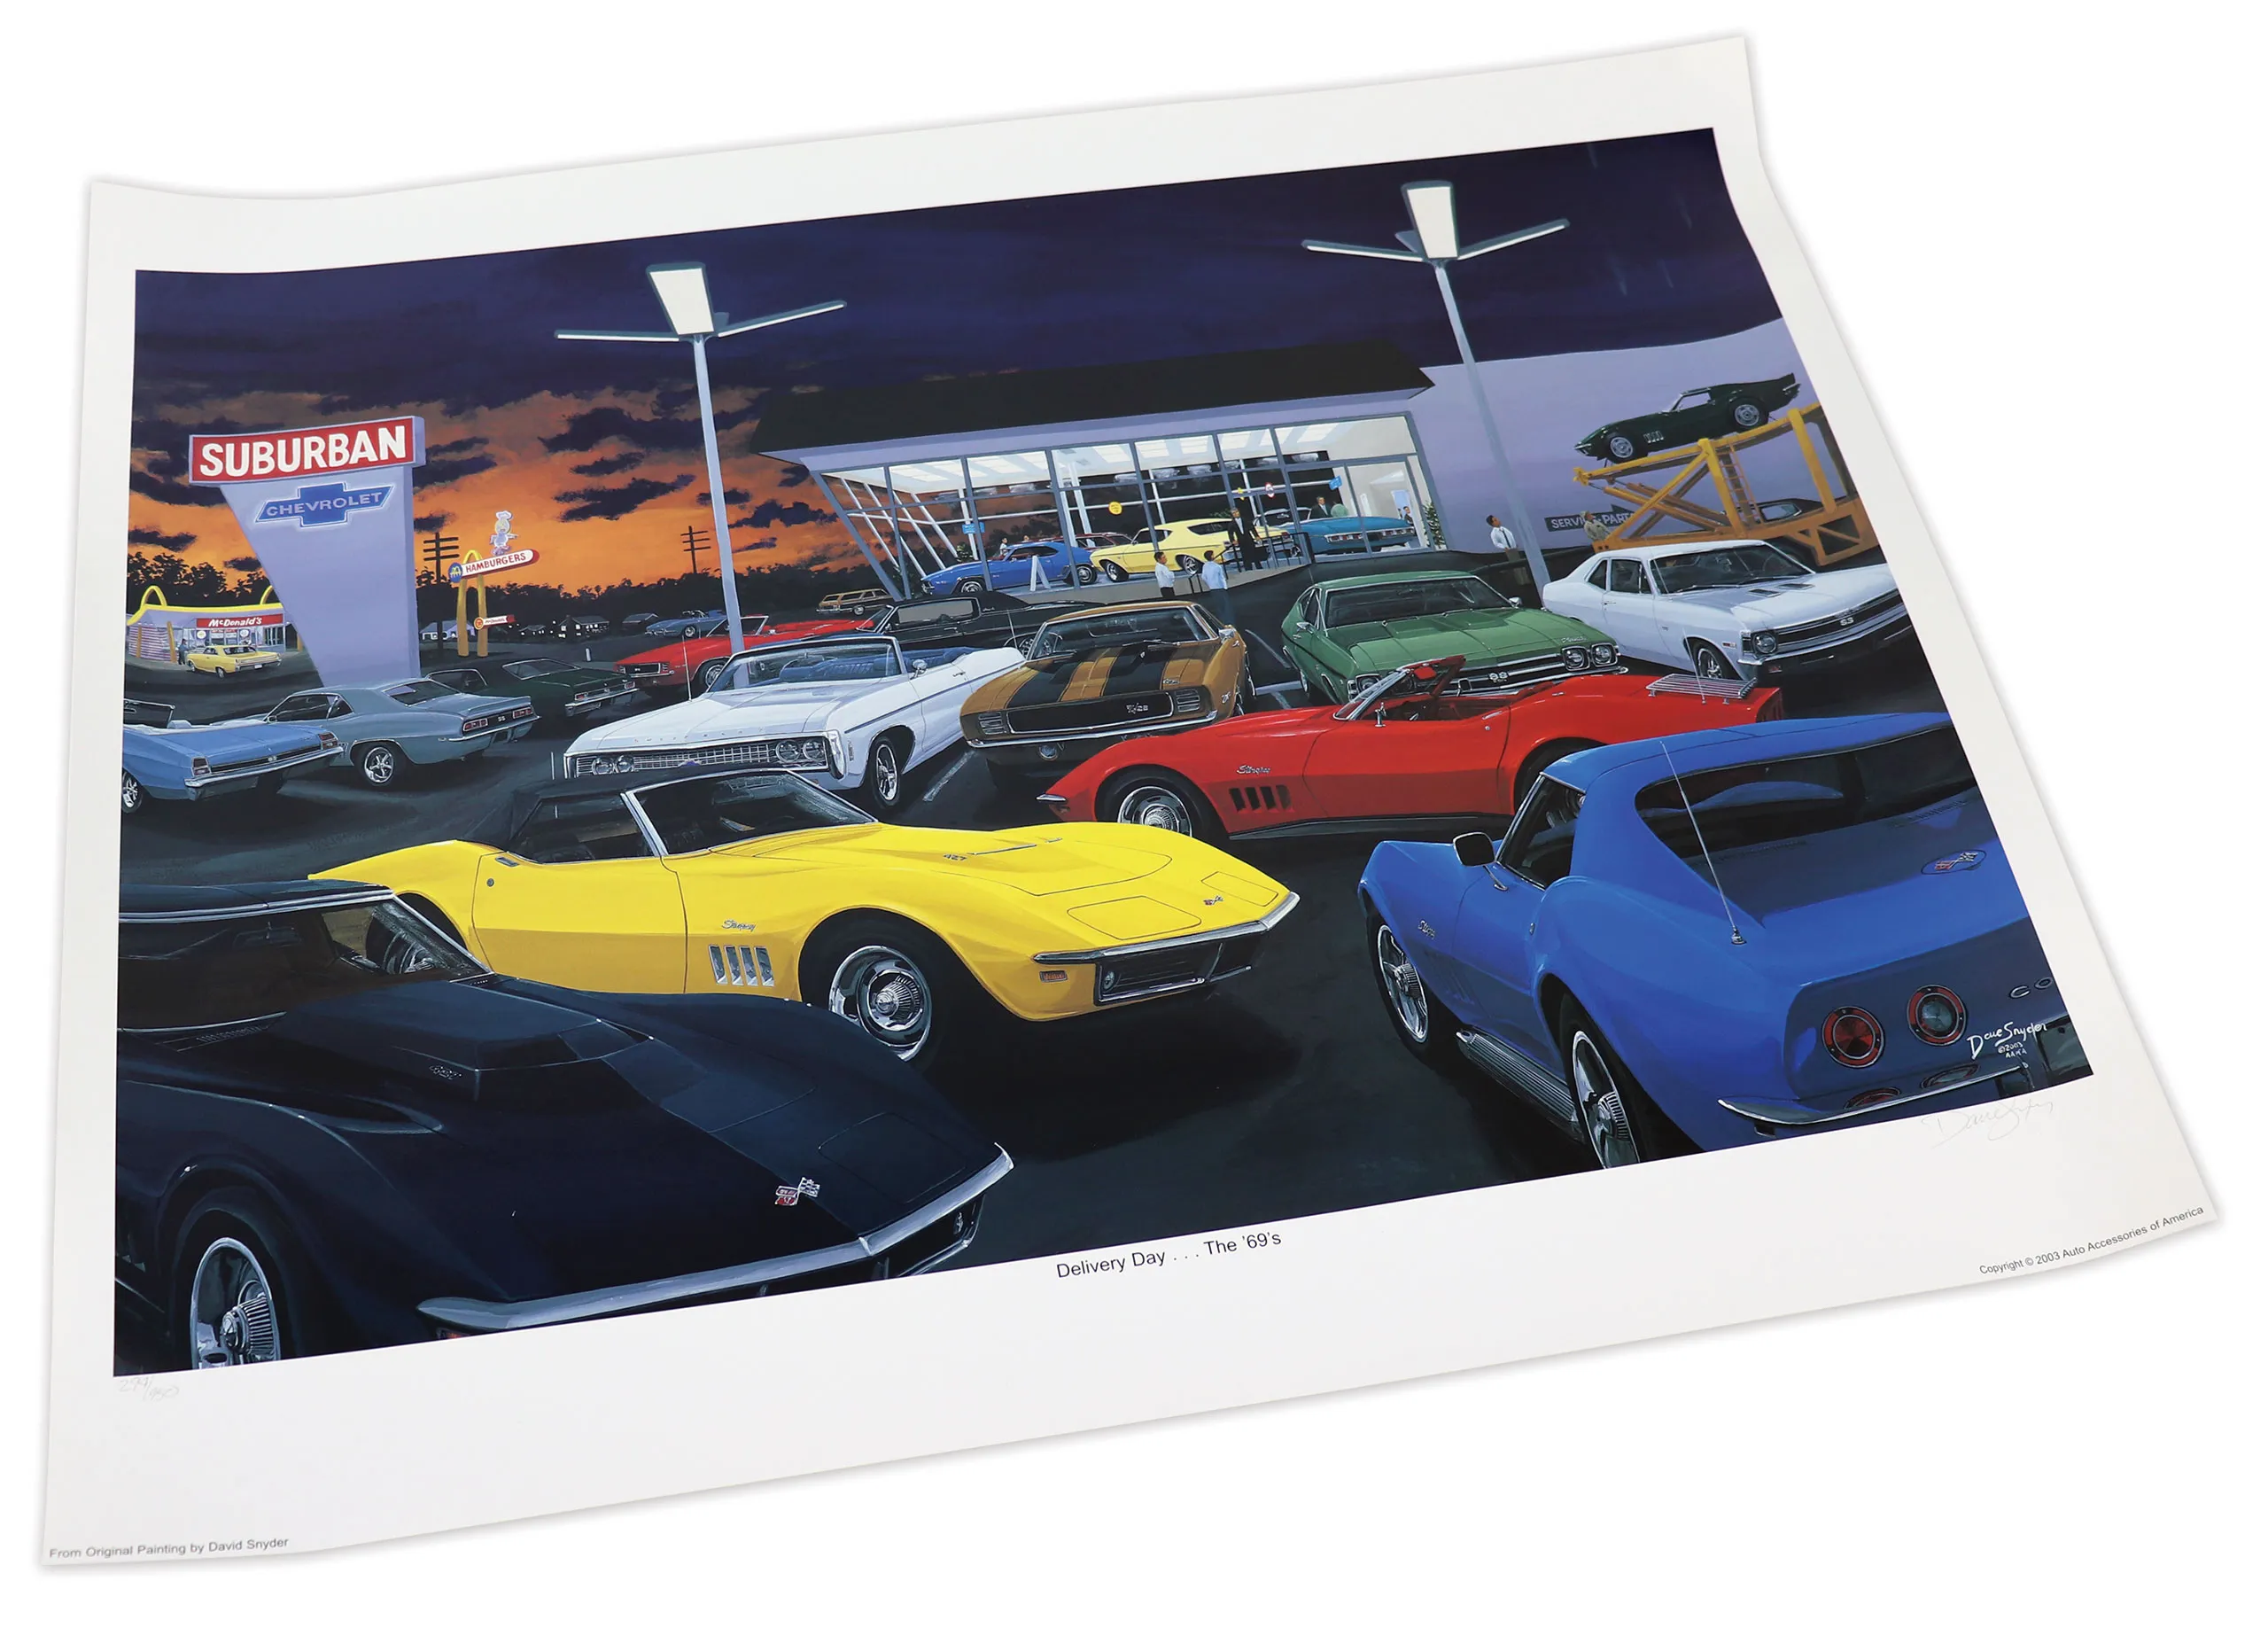 C3 1969 Chevrolet Corvette Delivery Day: The 69's Limited Edition Print - David Snyder